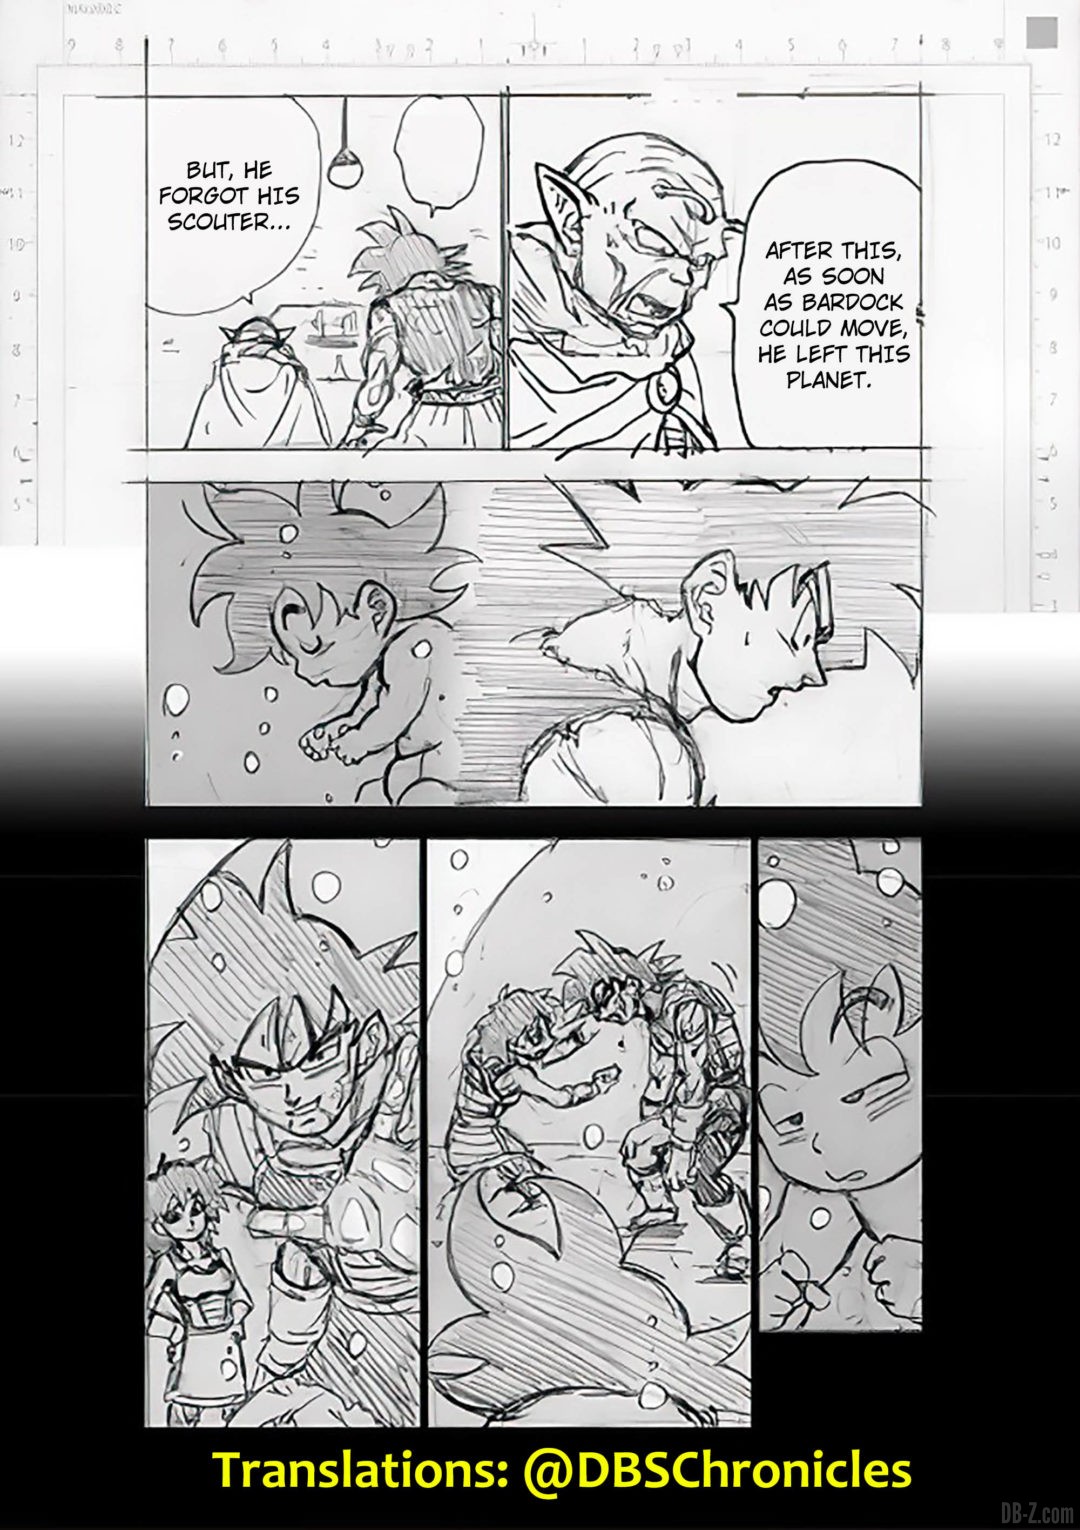 Brouillons chapitre 84 DBS Page 2 1